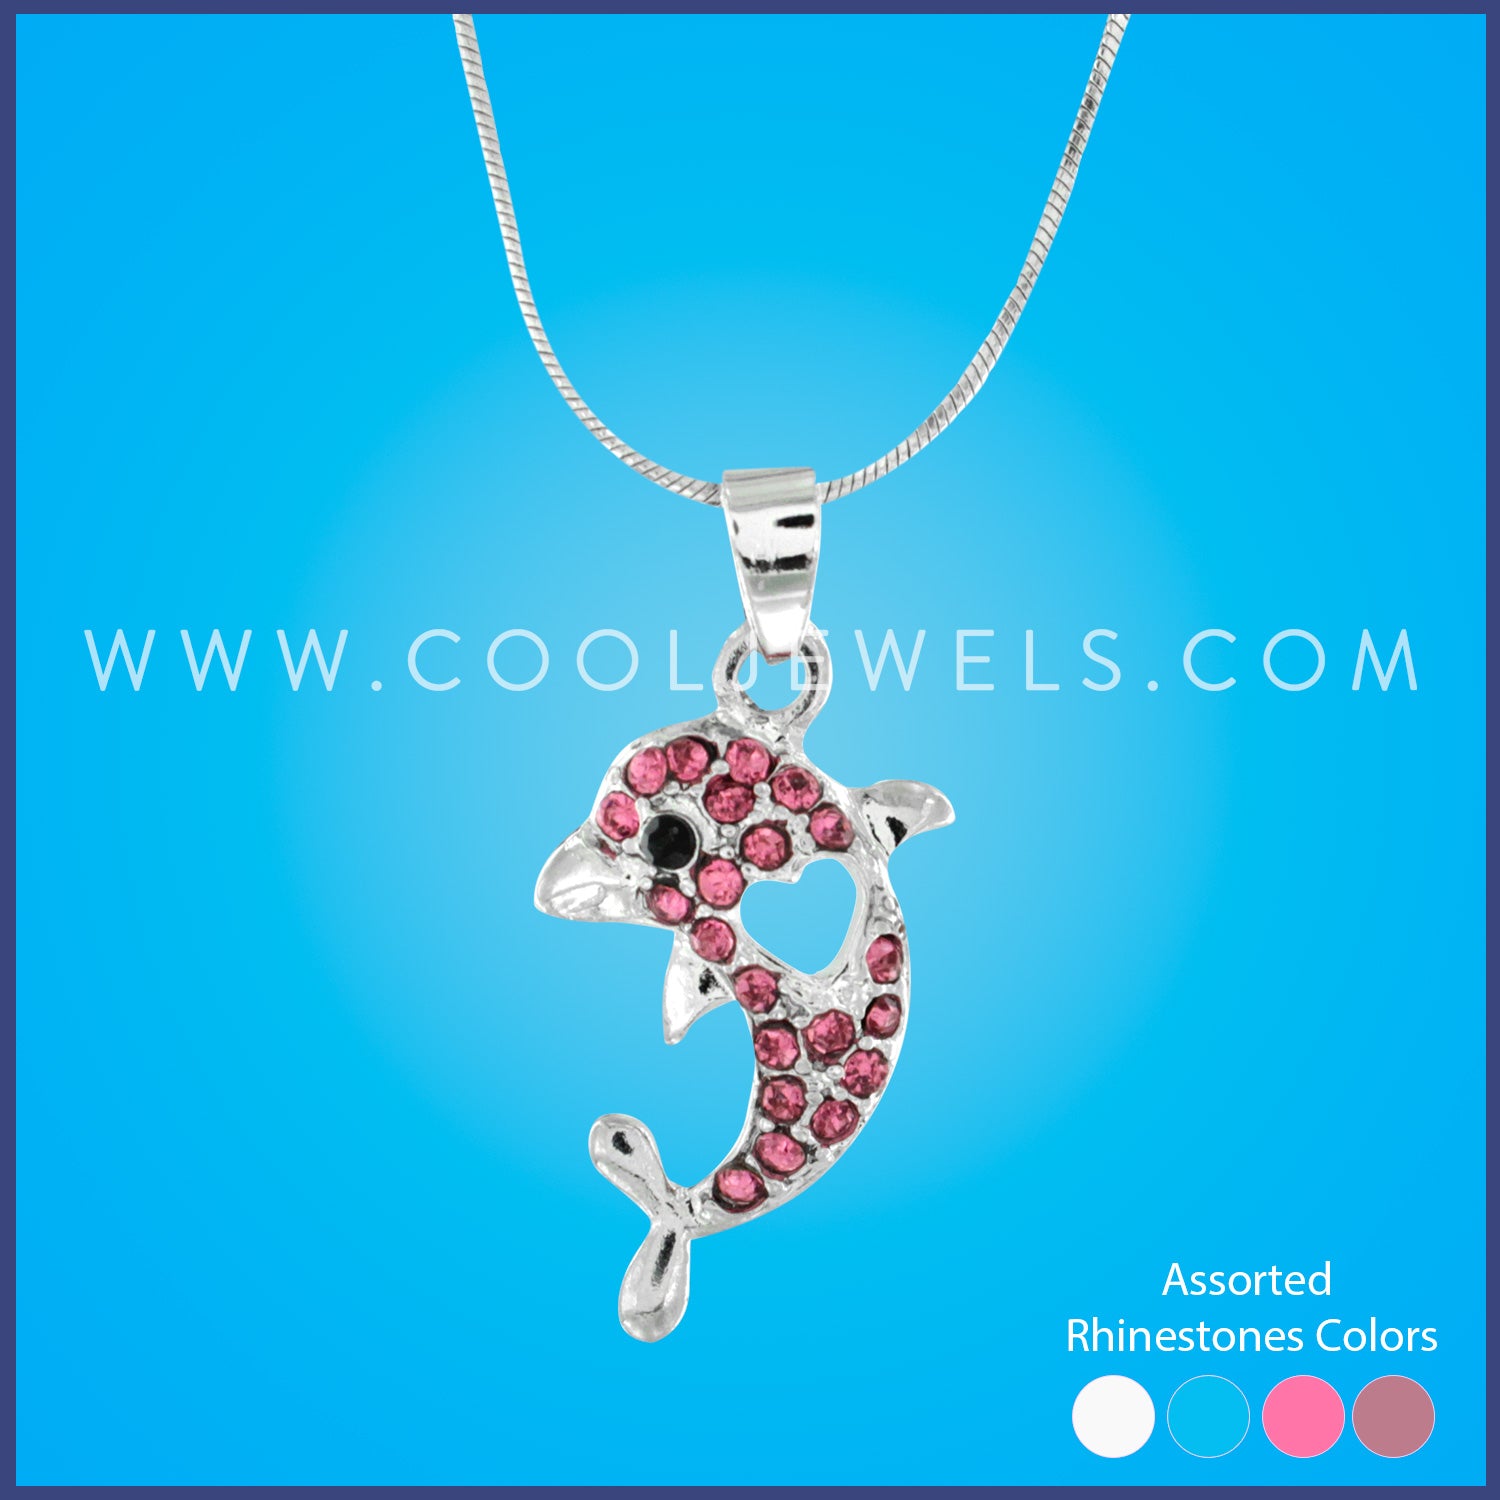 SILVER SNAKE CHAIN NECKLACE WIHT RHINESTONE DOLPHIN & HEART - ASSORTED